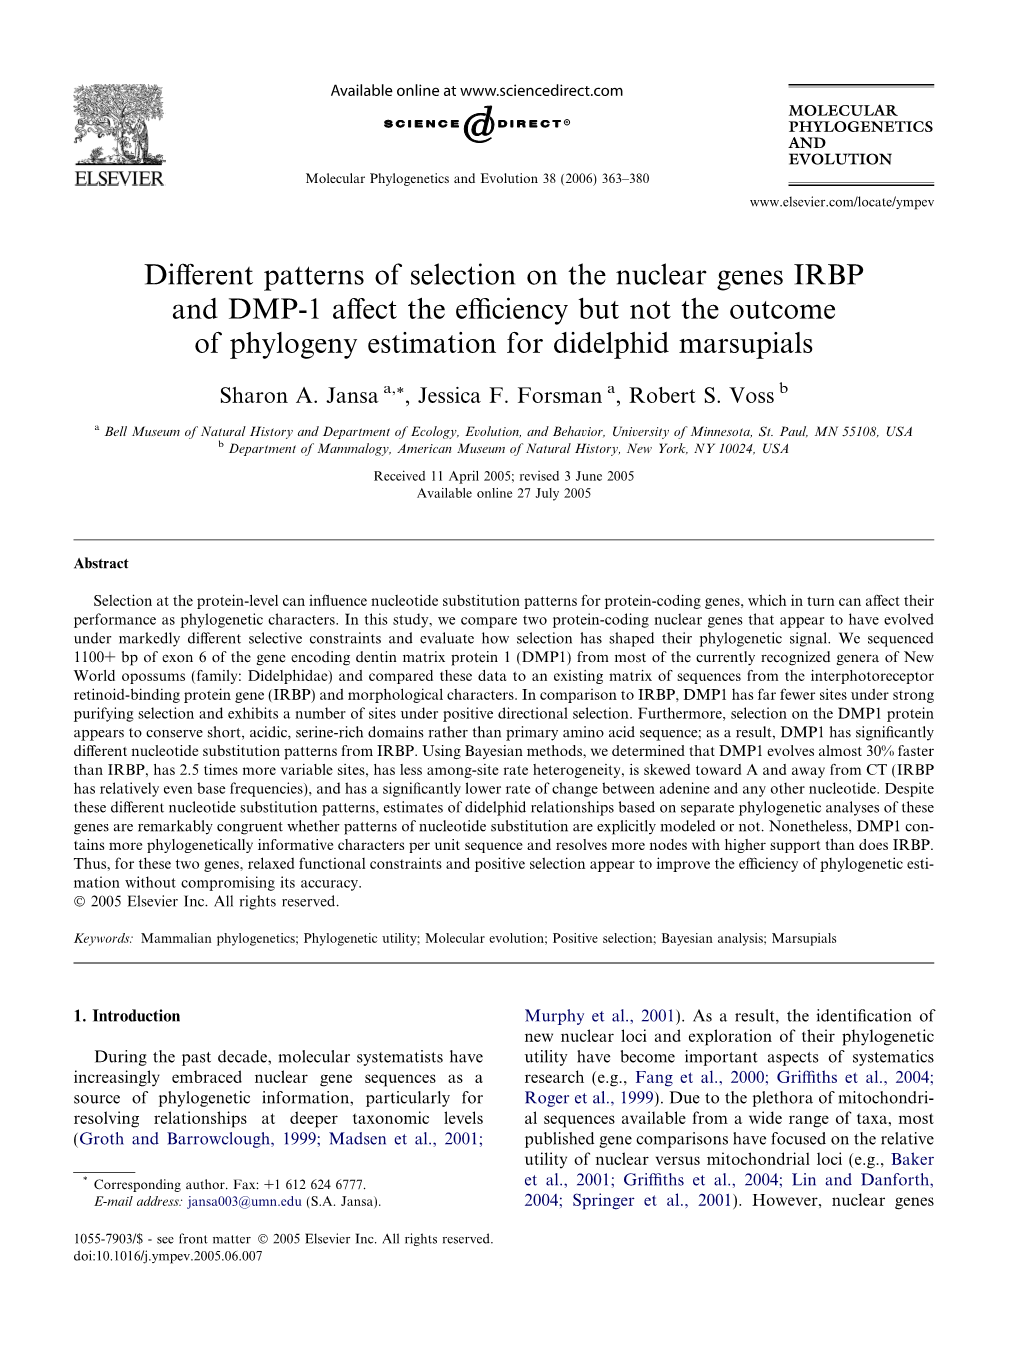 Different Patterns of Selection on the Nuclear Genes IRBP and DMP-1